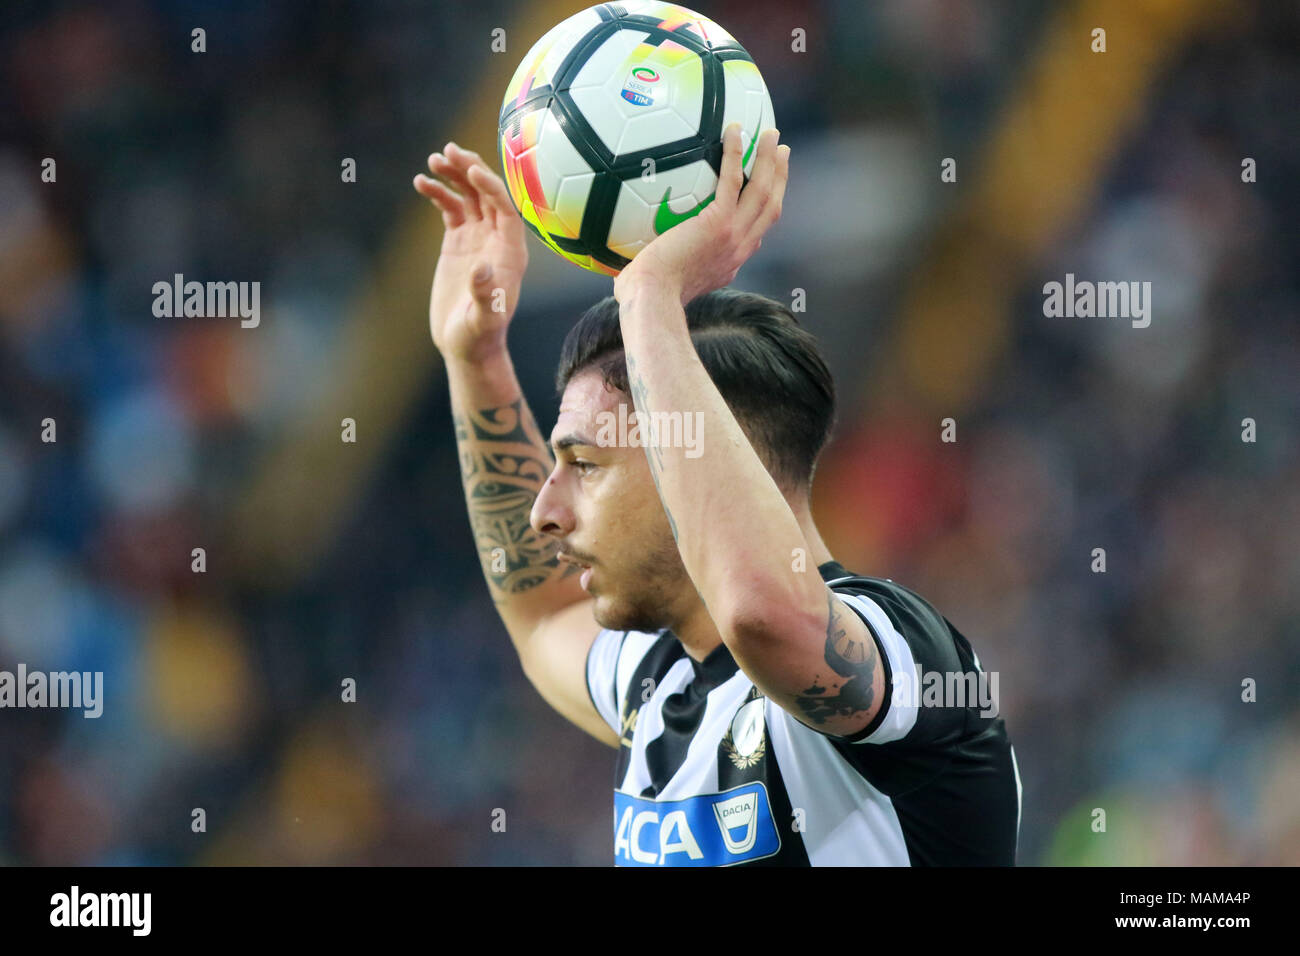 Udine, Italy. 3rd April, 2018. ITALY, Udine: Udinese's forward Giuseppe Pezzella looks during the Serie A football match between Udinese Calcio v AC Fiorentina at Dacia Arena Stadium on 3rd April, 2018. Credit: Andrea Spinelli/Alamy Live News Stock Photo